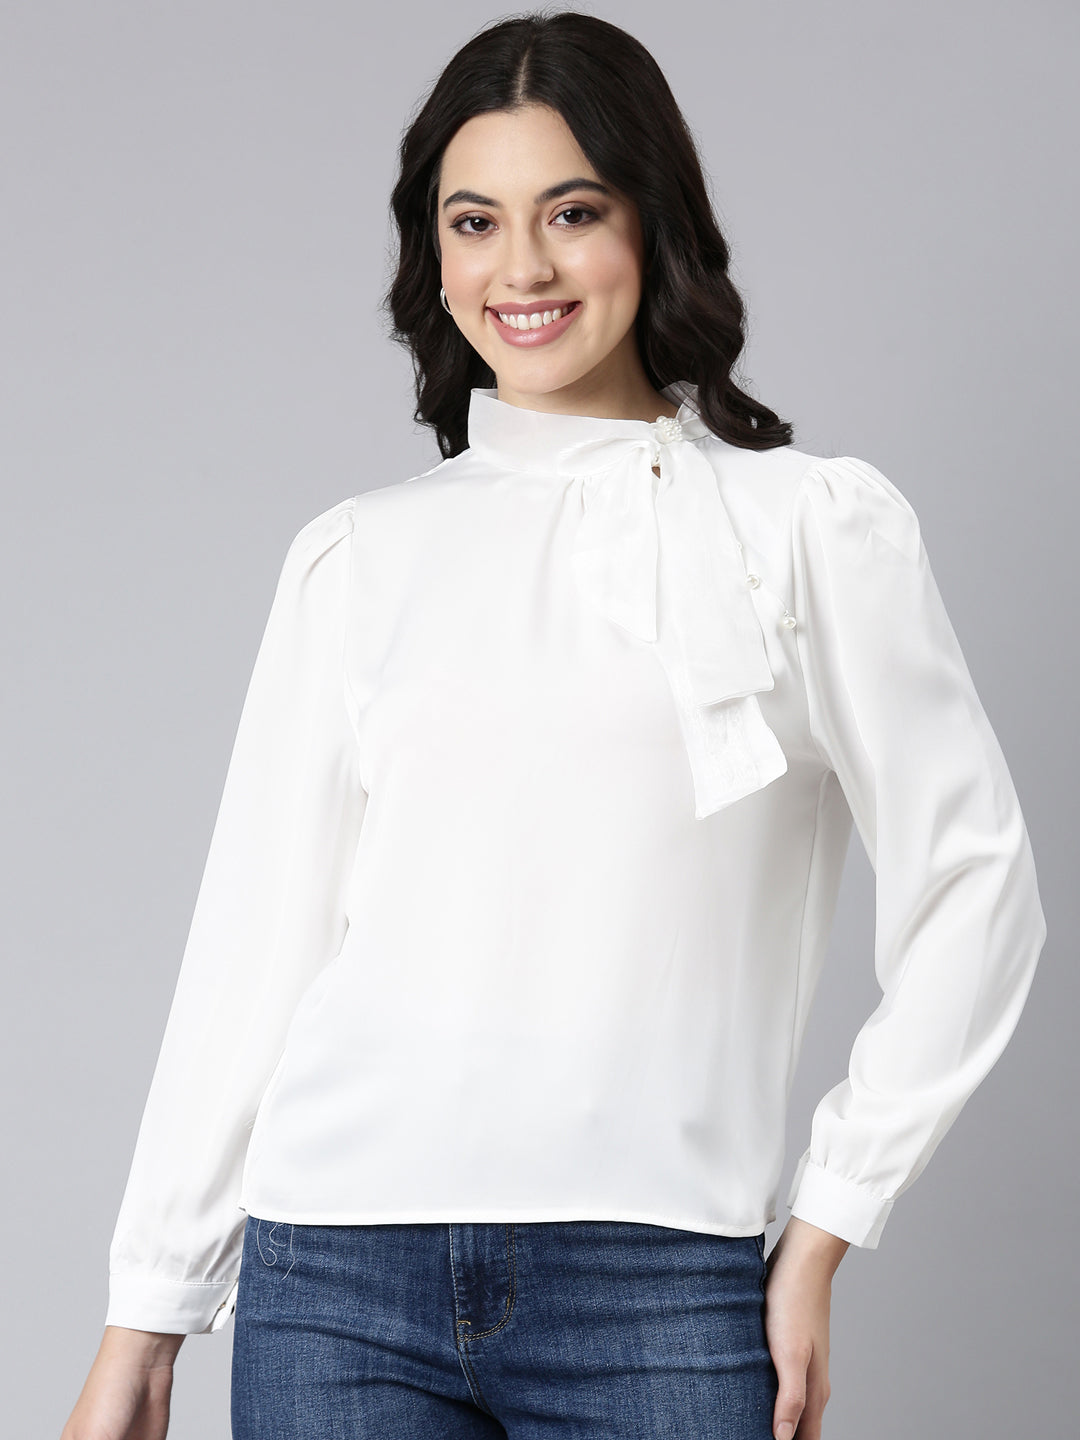 Women Solid Shirt Style White Top